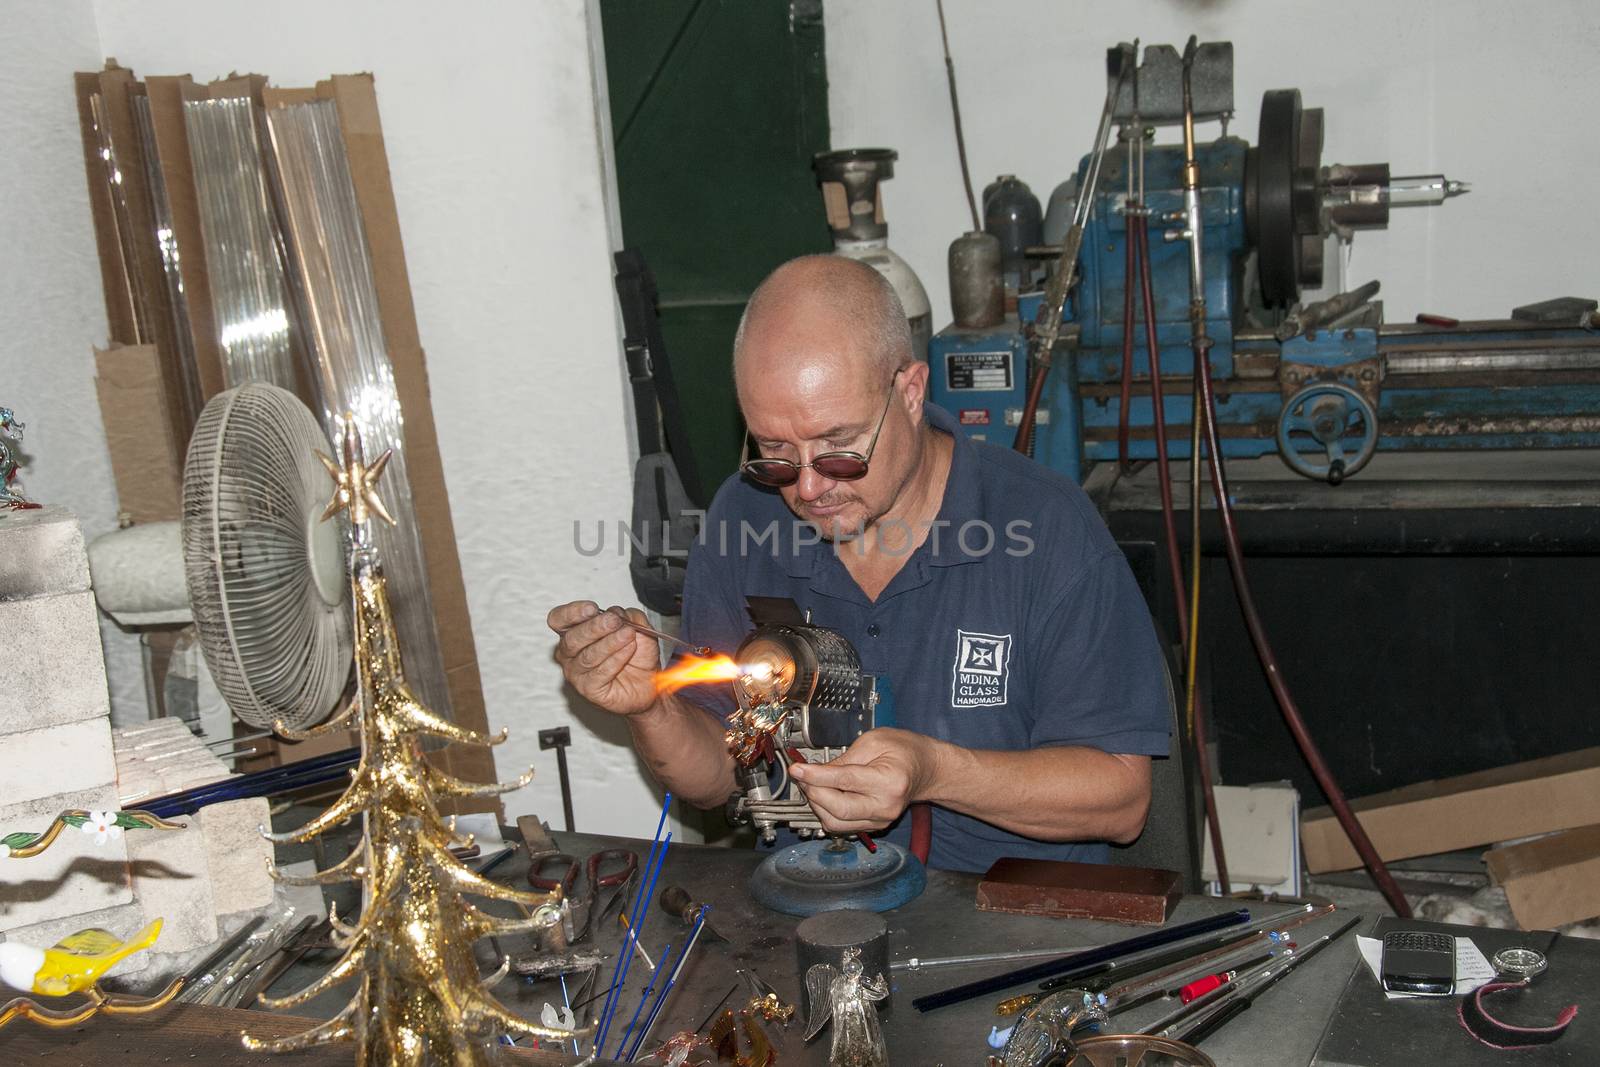 MDINA,MALTA-SEPTEMBER 29, 2011: Glass blower making glass in hot fire ,on September 29 2011, the glass blowers are showng their profession to tourist and sell the product when finished